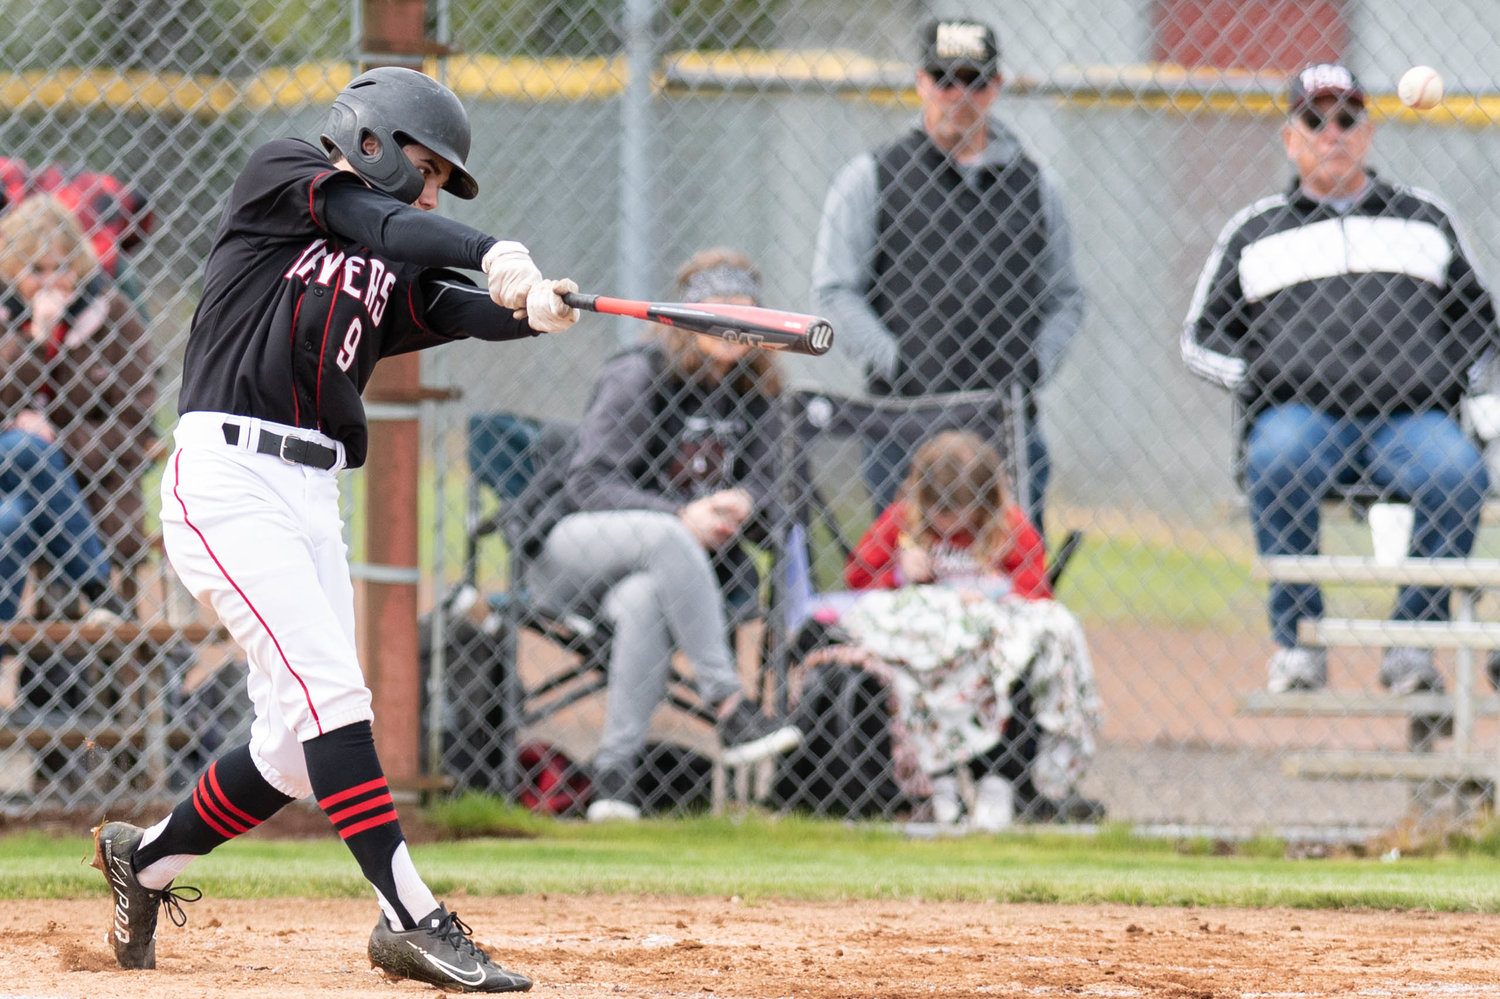 Tenino's Austin Gonia connects on an Eatonville pitch during the district playoffs in Castle Rock on May 13.